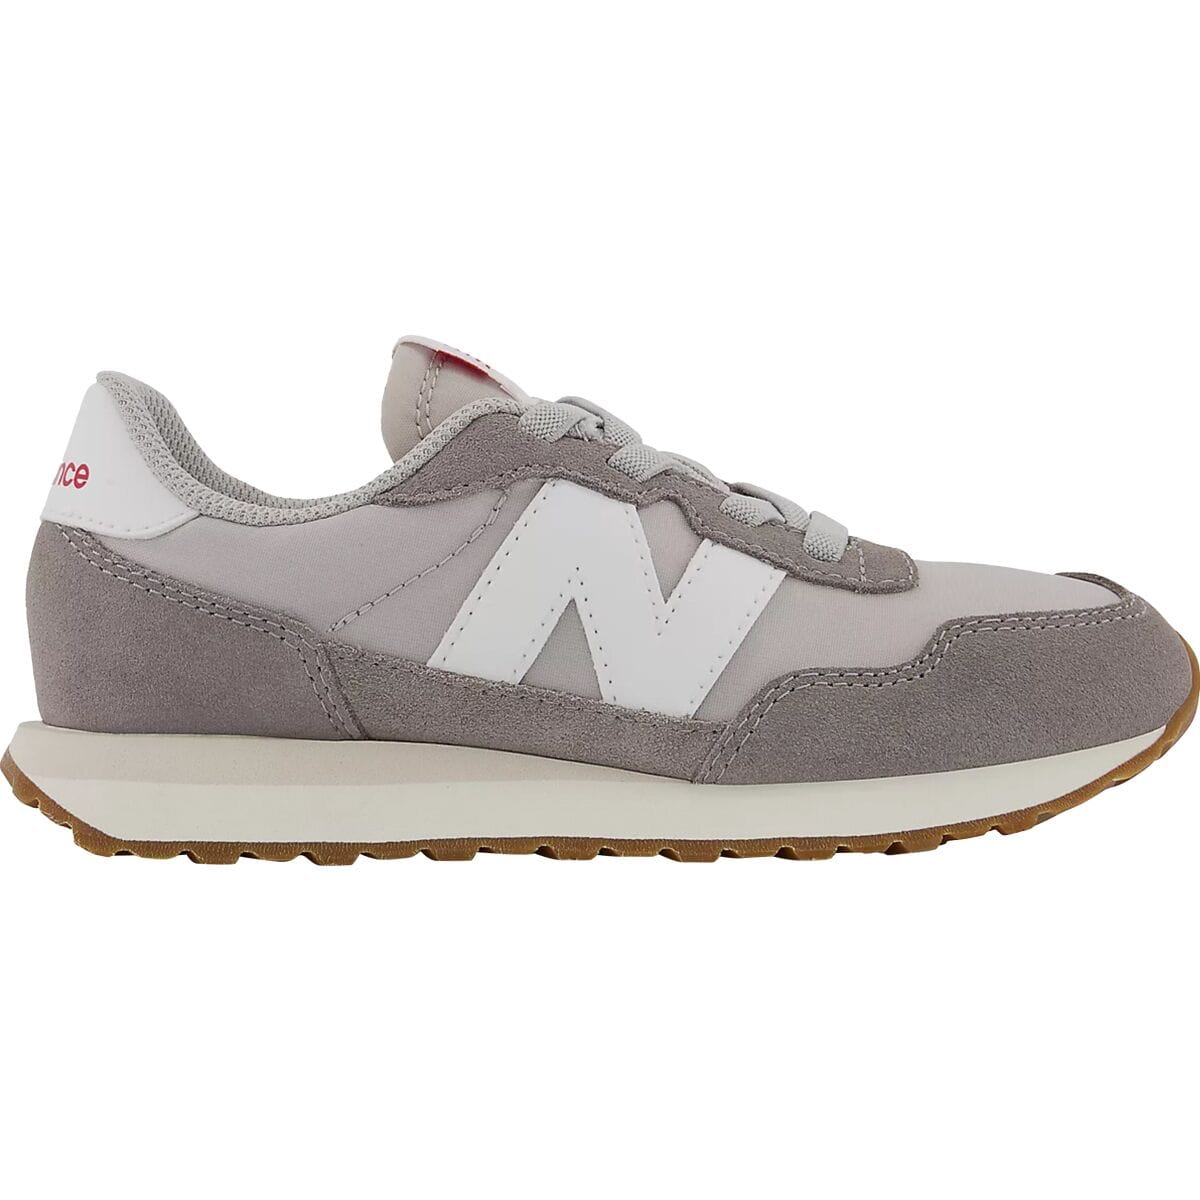 New Balance 237 Bungee Shoe - Toddlers'